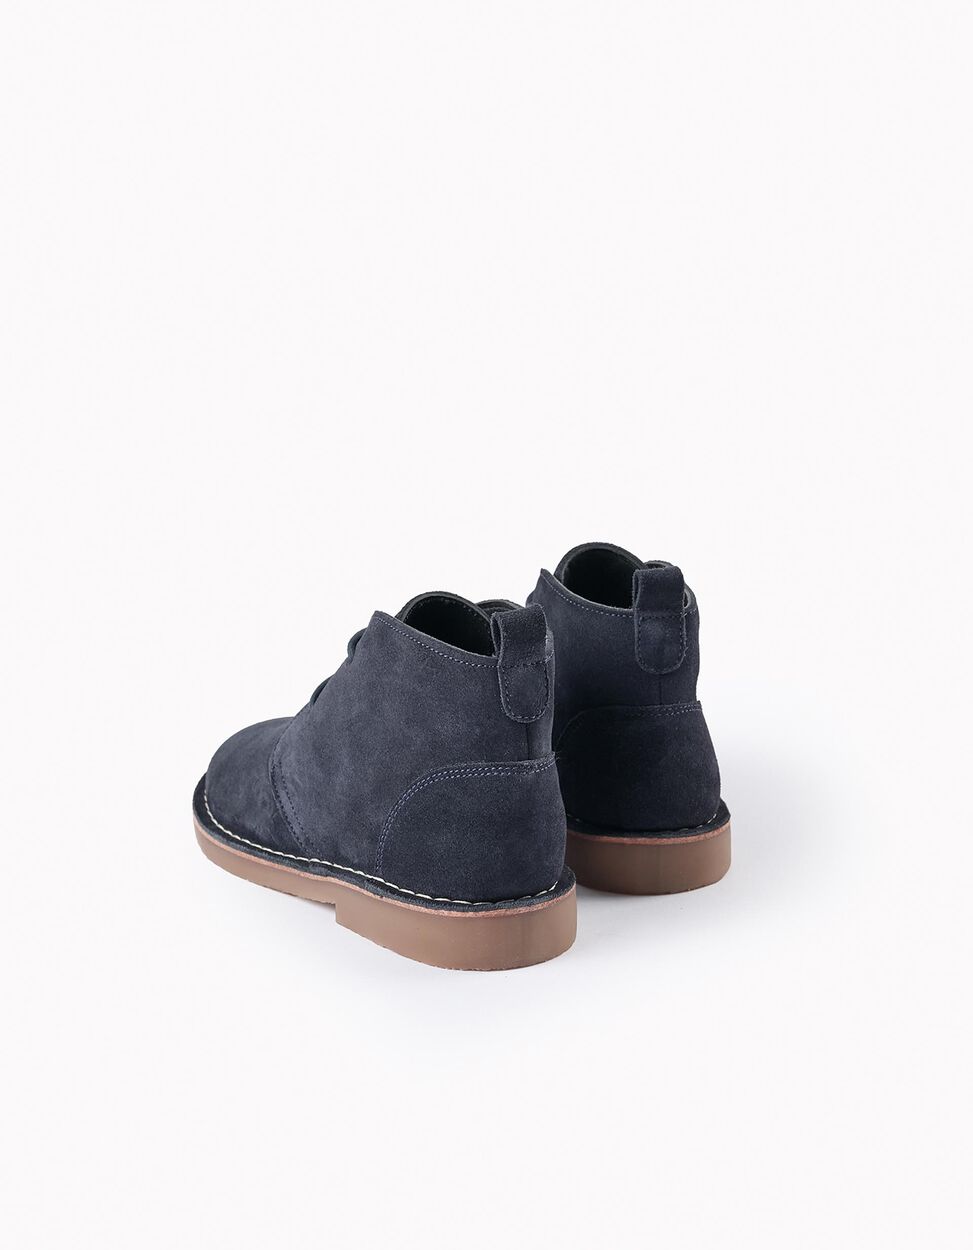 Buy Online Suede Leather Boots for Boys, Dark Blue